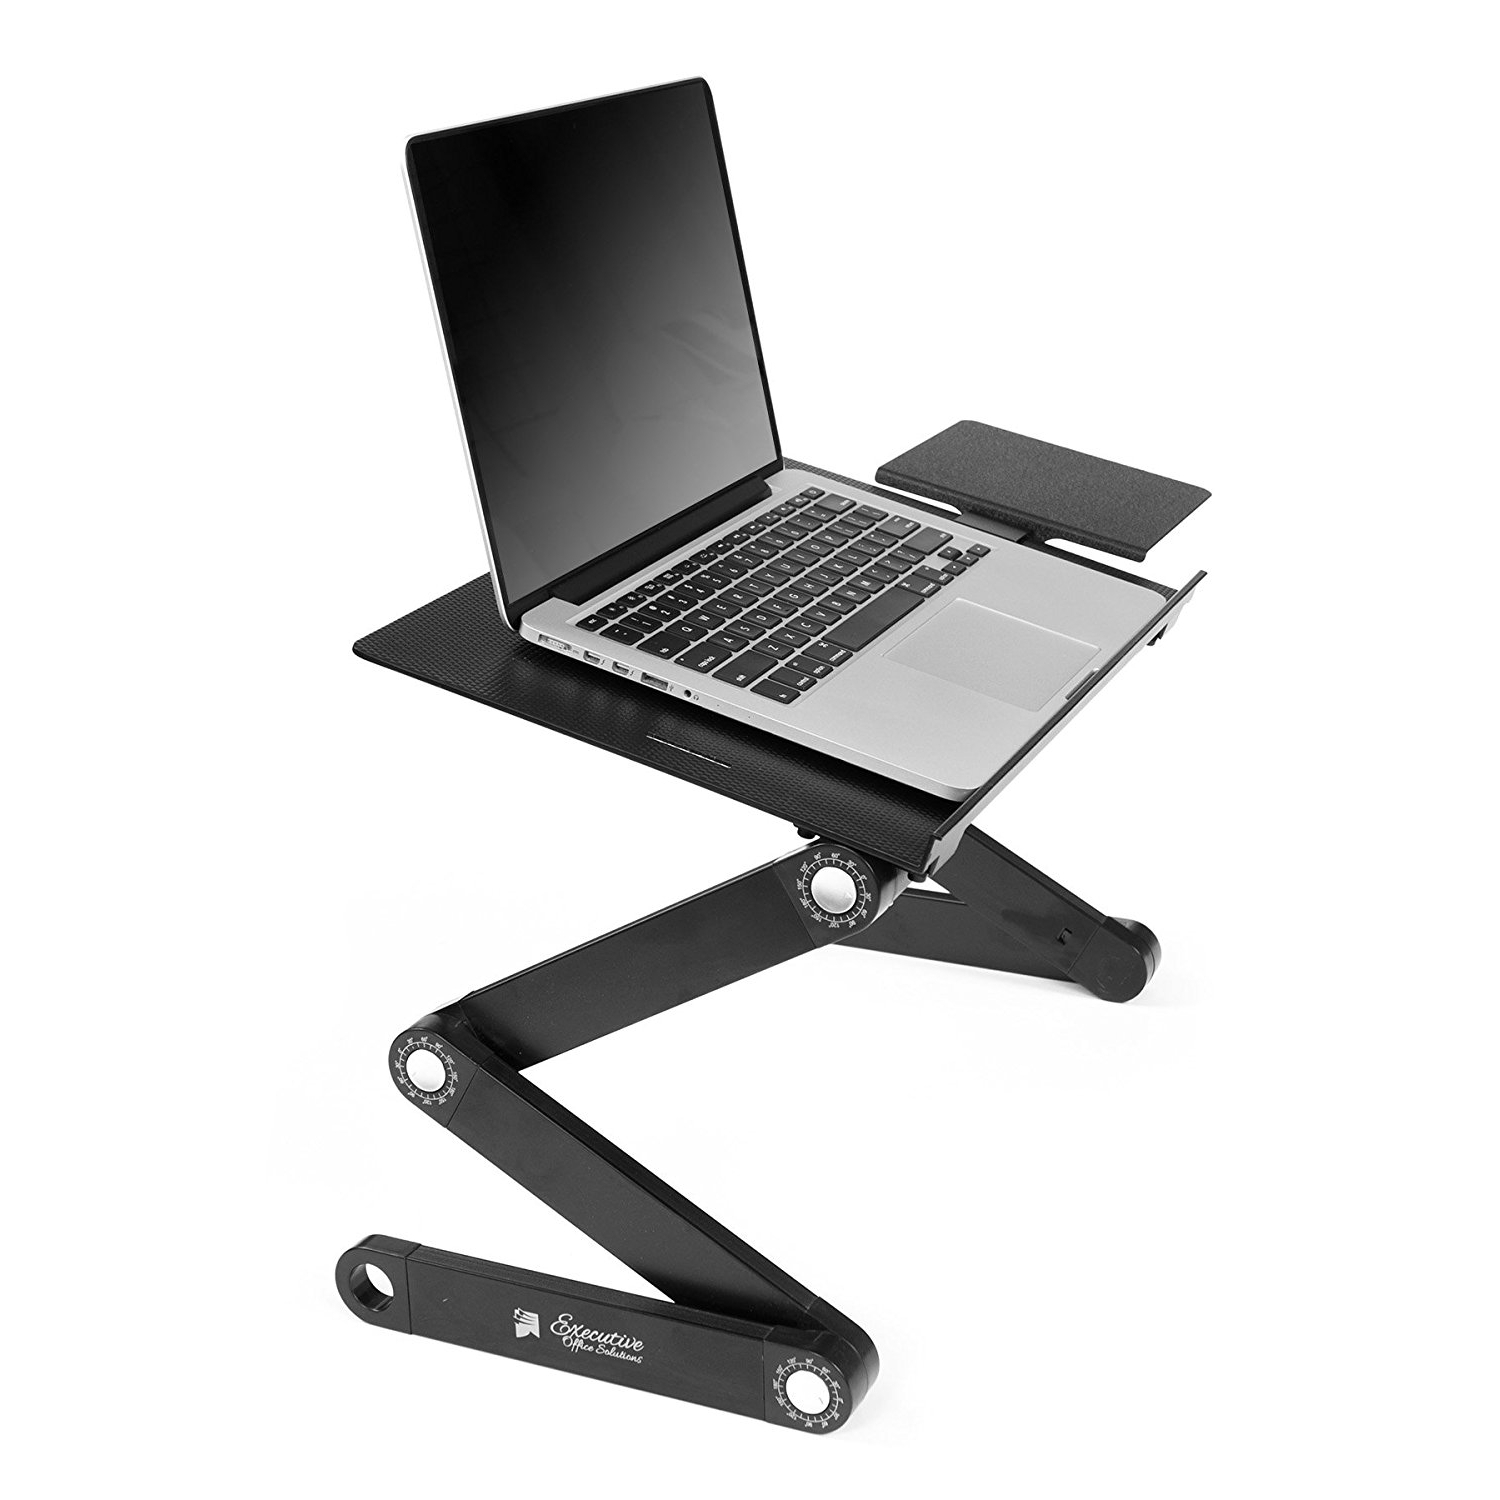 Grey Portable Laptop Stands Elevator for Desk with Heat-Vent Multi-Angle Laptop Holder-Support All Laptops 11-17 Laptop Stand Adjustable,Ergonomic Aluminum Foldable Computer Stand 